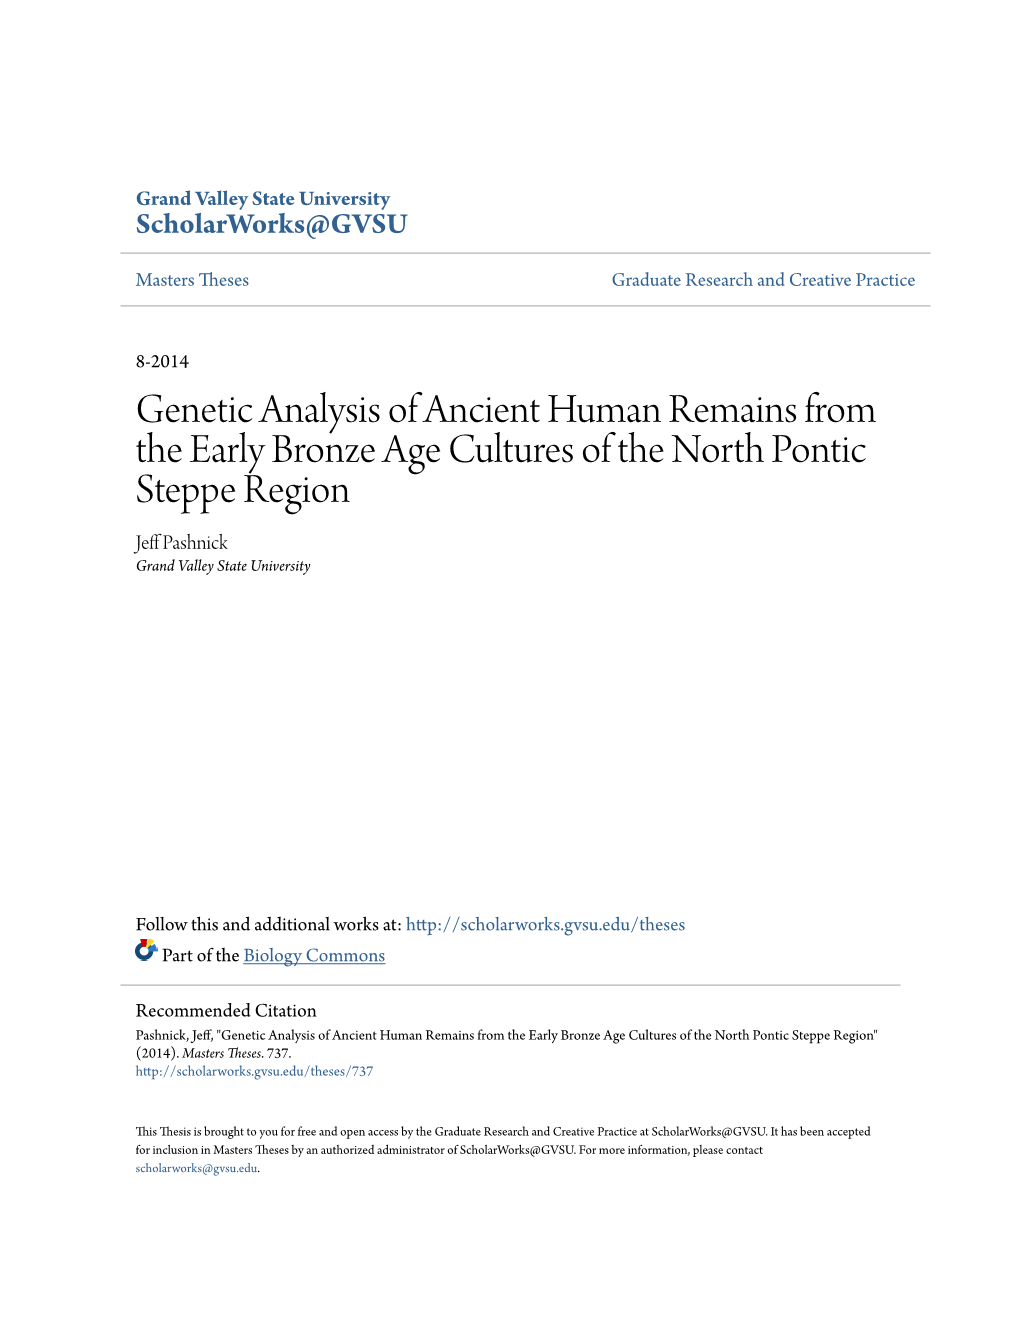 Genetic Analysis of Ancient Human Remains from the Early Bronze Age Cultures of the North Pontic Steppe Region Jeff Ap Shnick Grand Valley State University